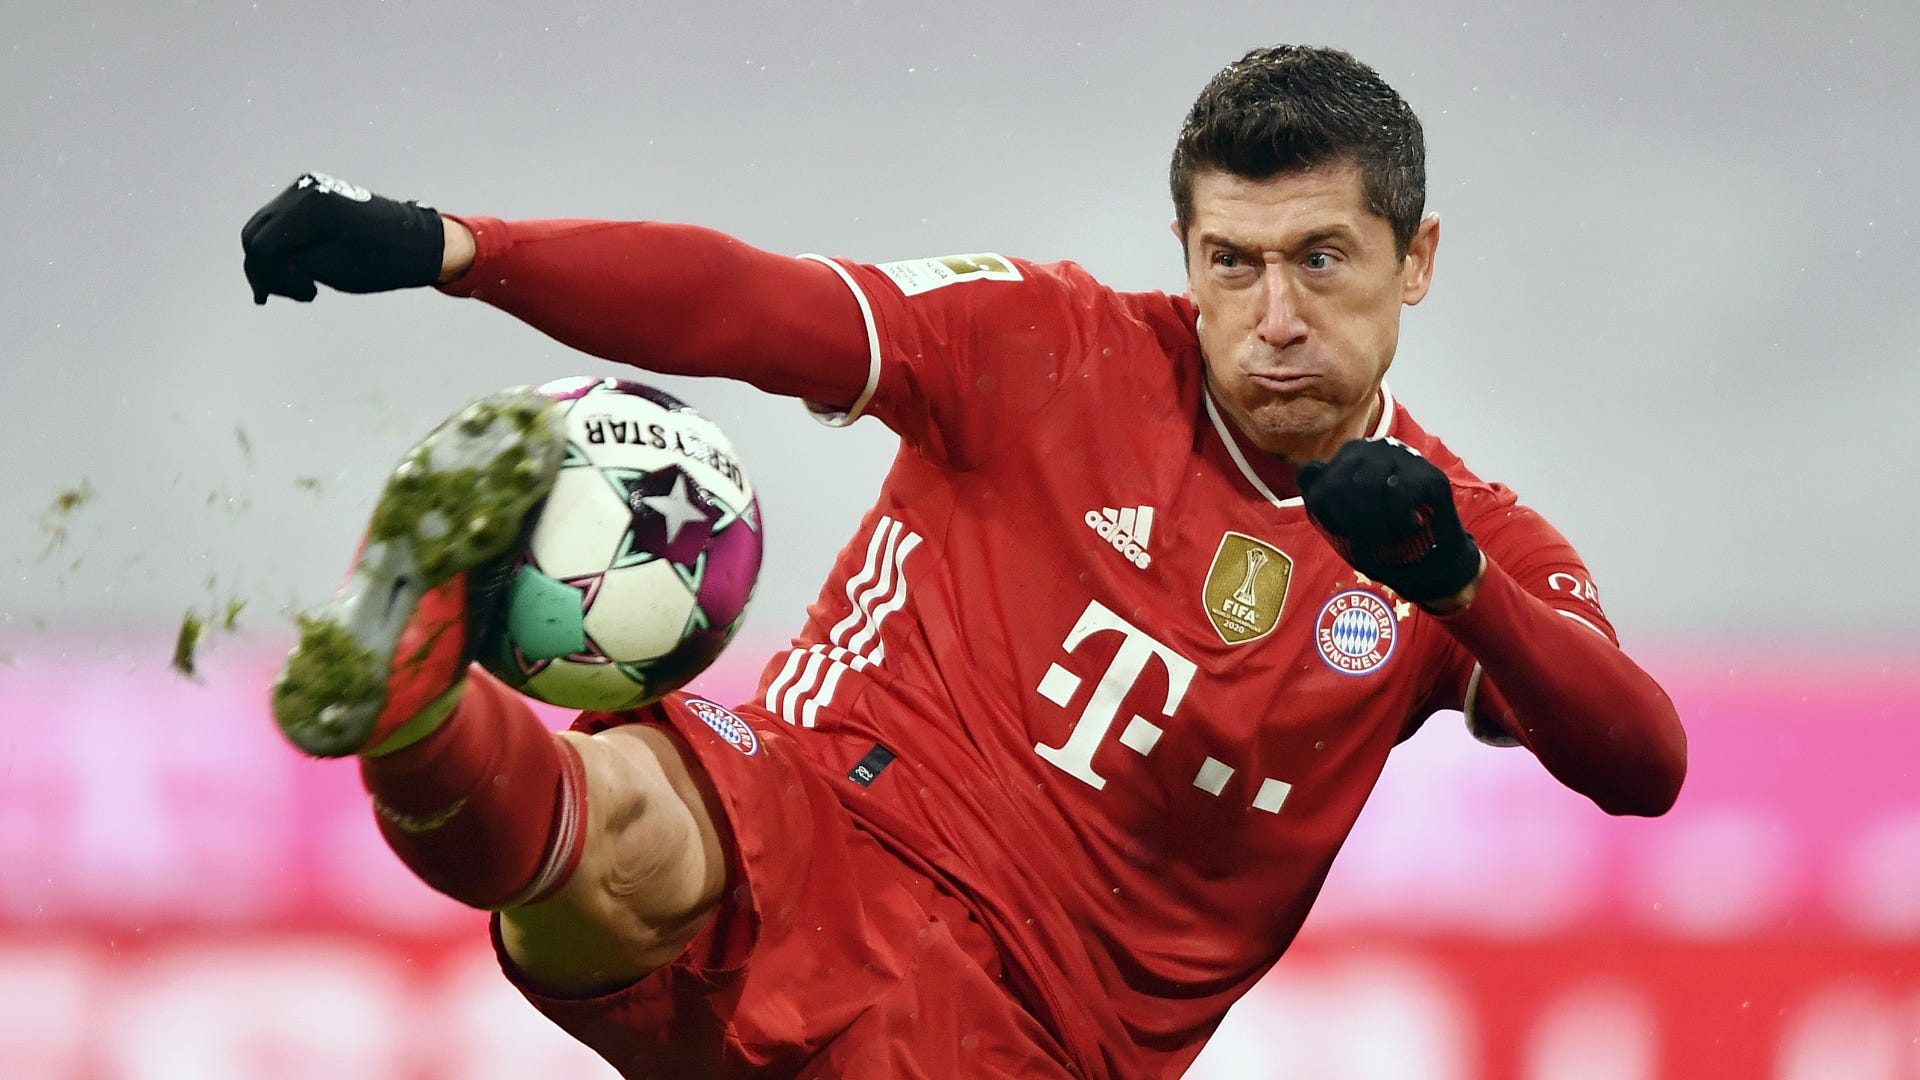 Lewandowski overtakes Raul as Champions League's third-highest scorer with only Ronaldo and Messi ahead